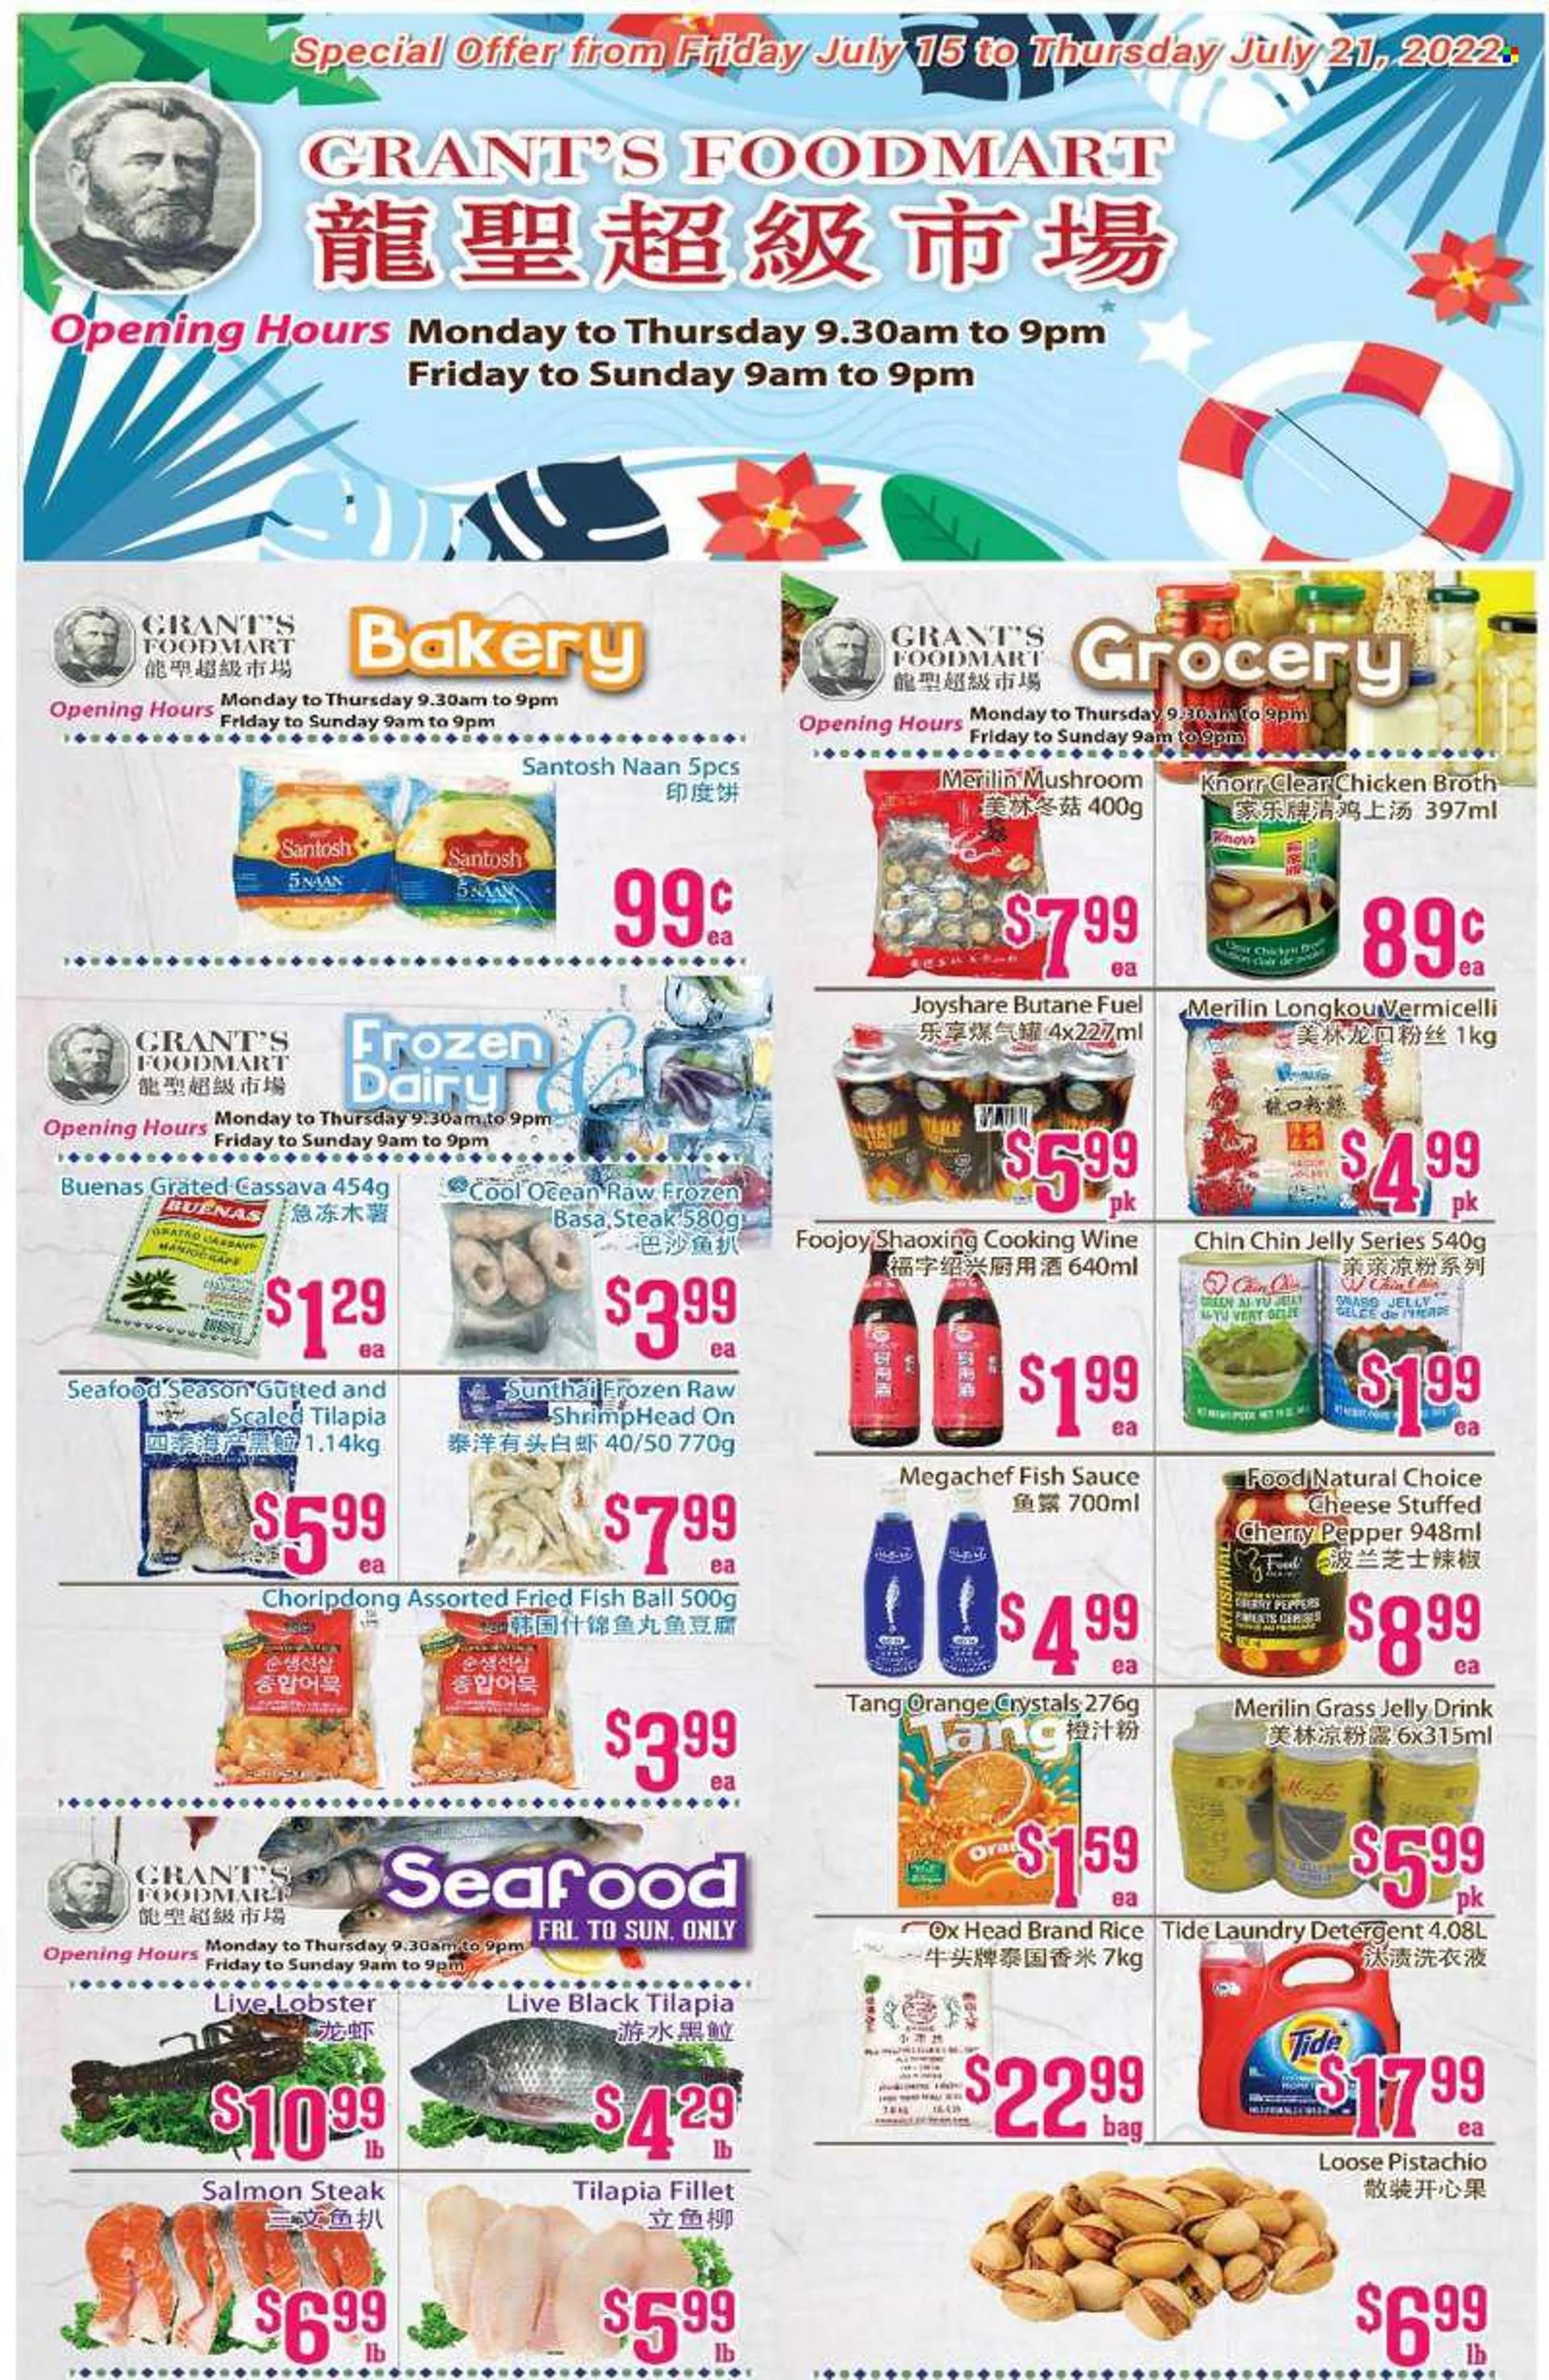 Grants Foodmart Flyer - July 15, 2022 - July 21, 2022 - Sales products - mushroom, peppers, cassava, cherries, orange, lobster, salmon, tilapia, seafood, fried fish, sauce, cheese, jelly, chicken broth, broth, rice, fish sauce, cooking wine, shaoxing wine